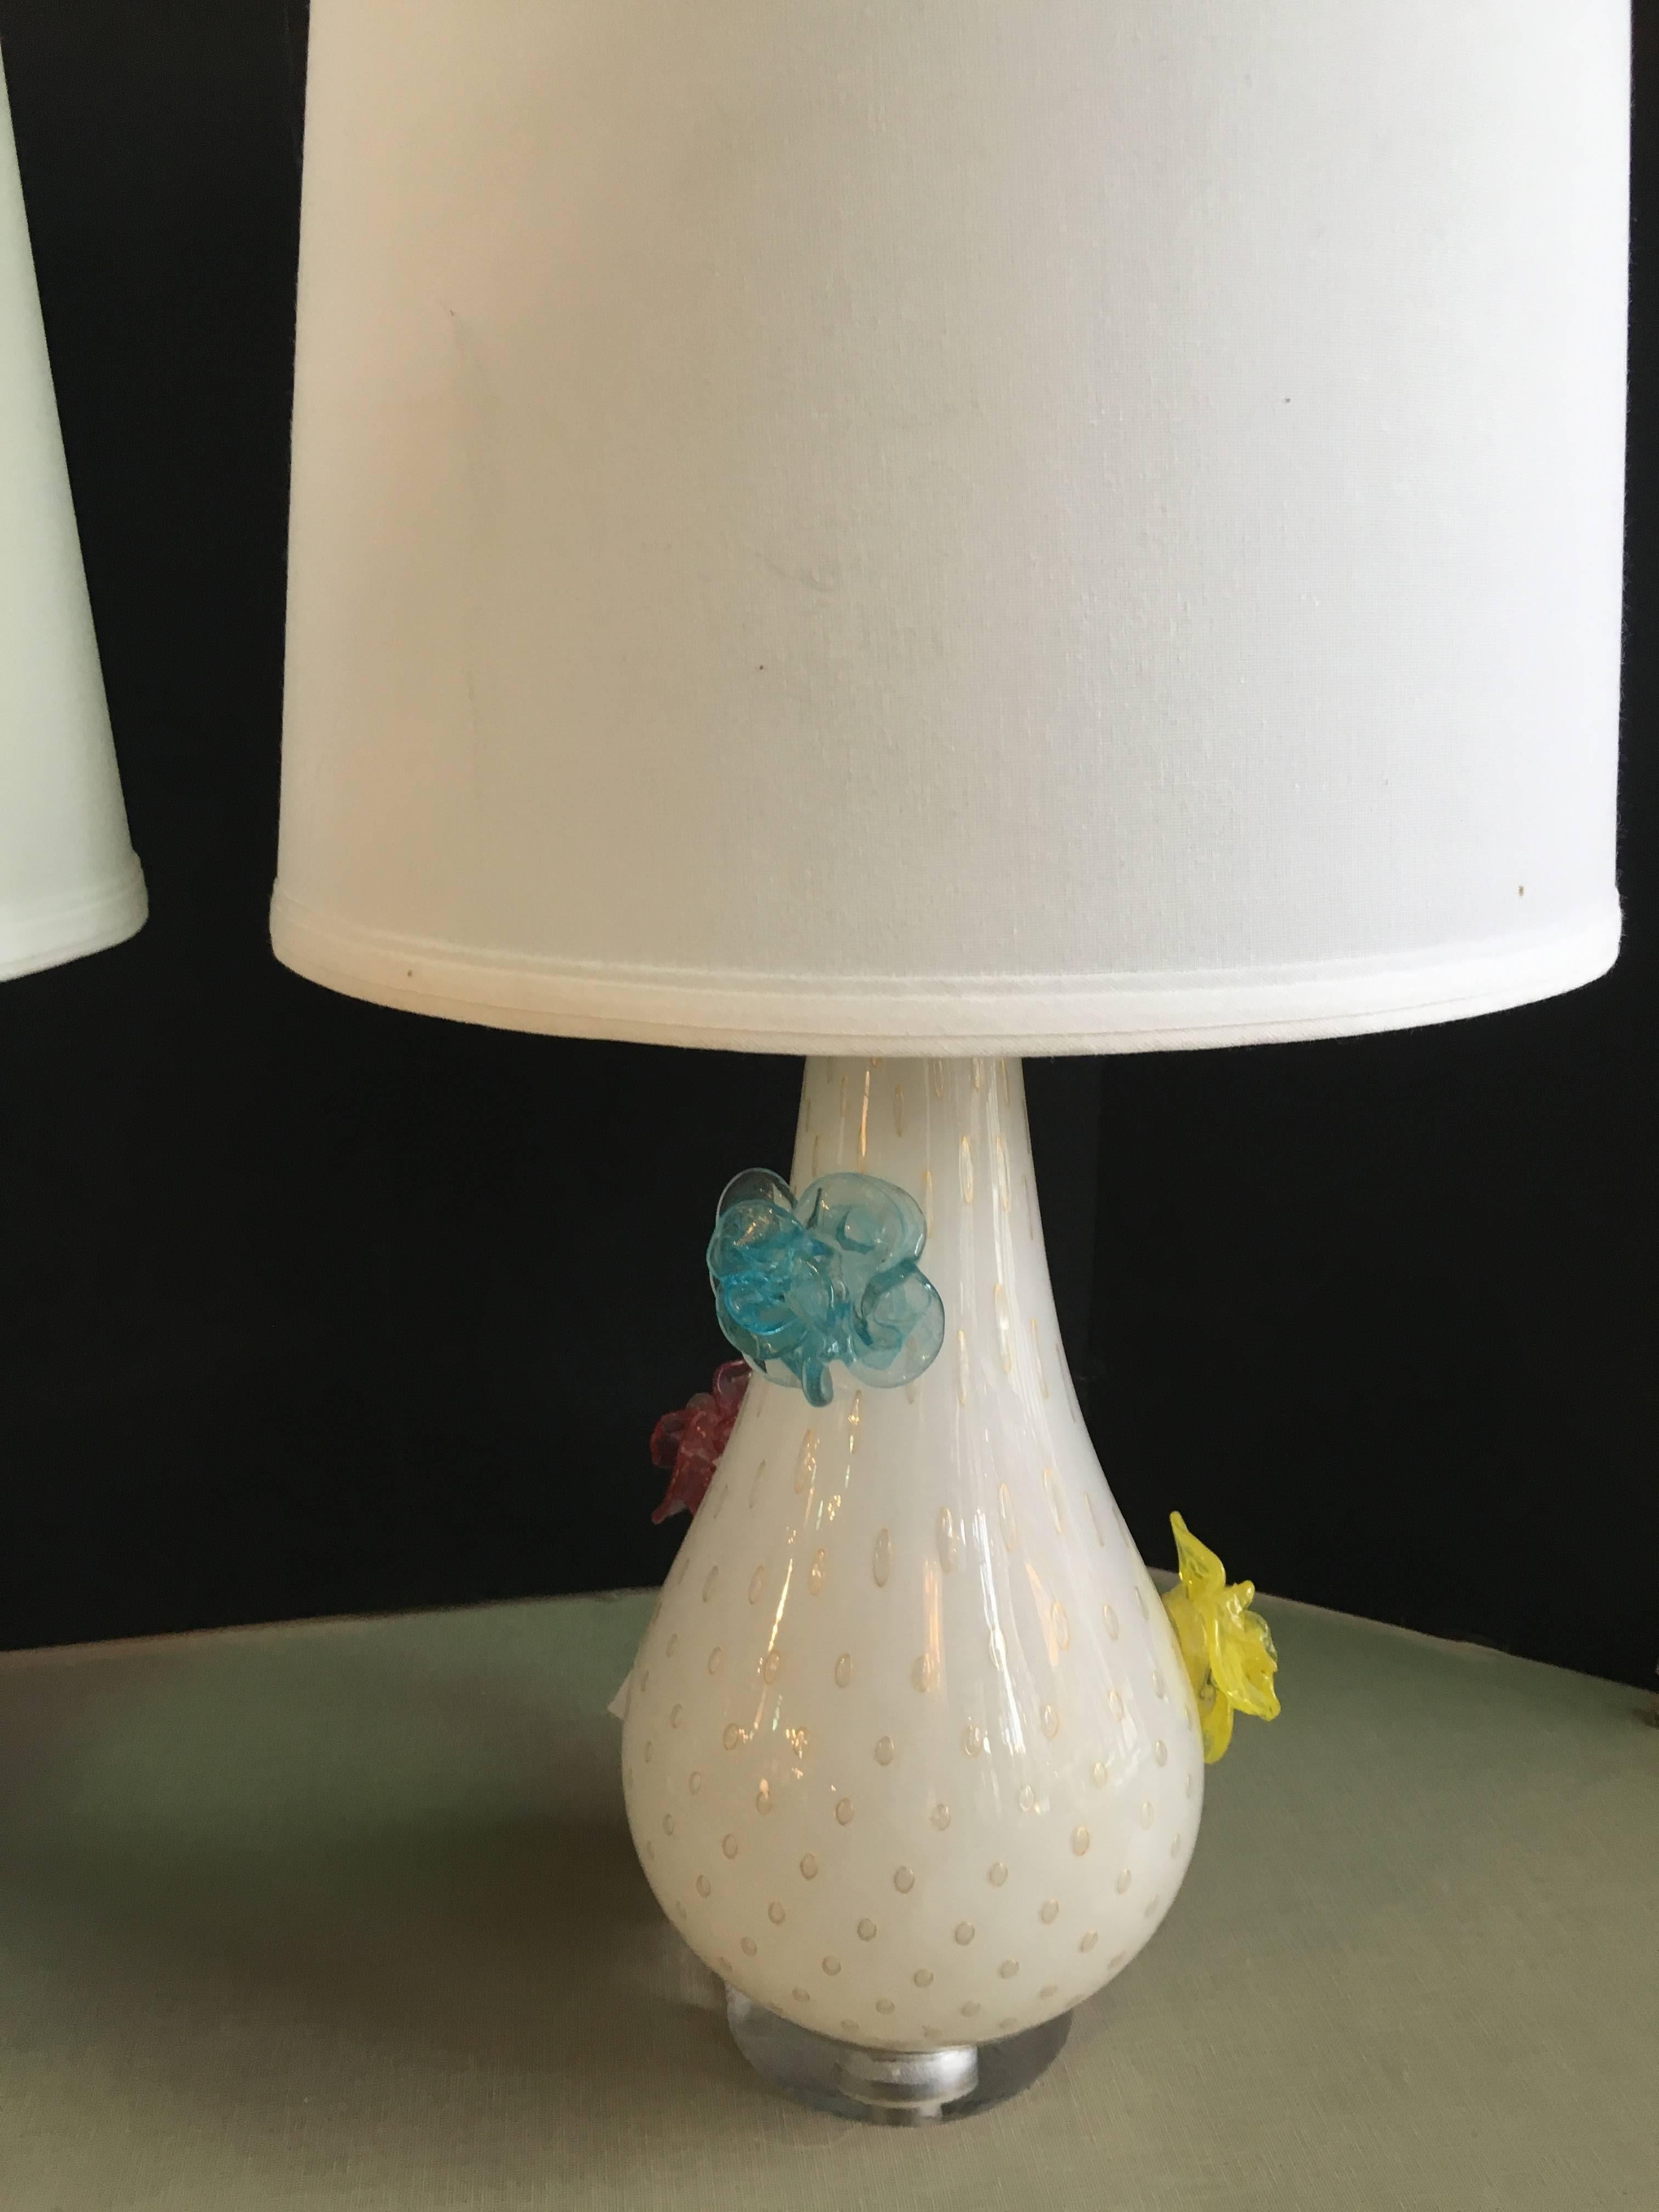 A pair of Murano glass lamps with flowers.